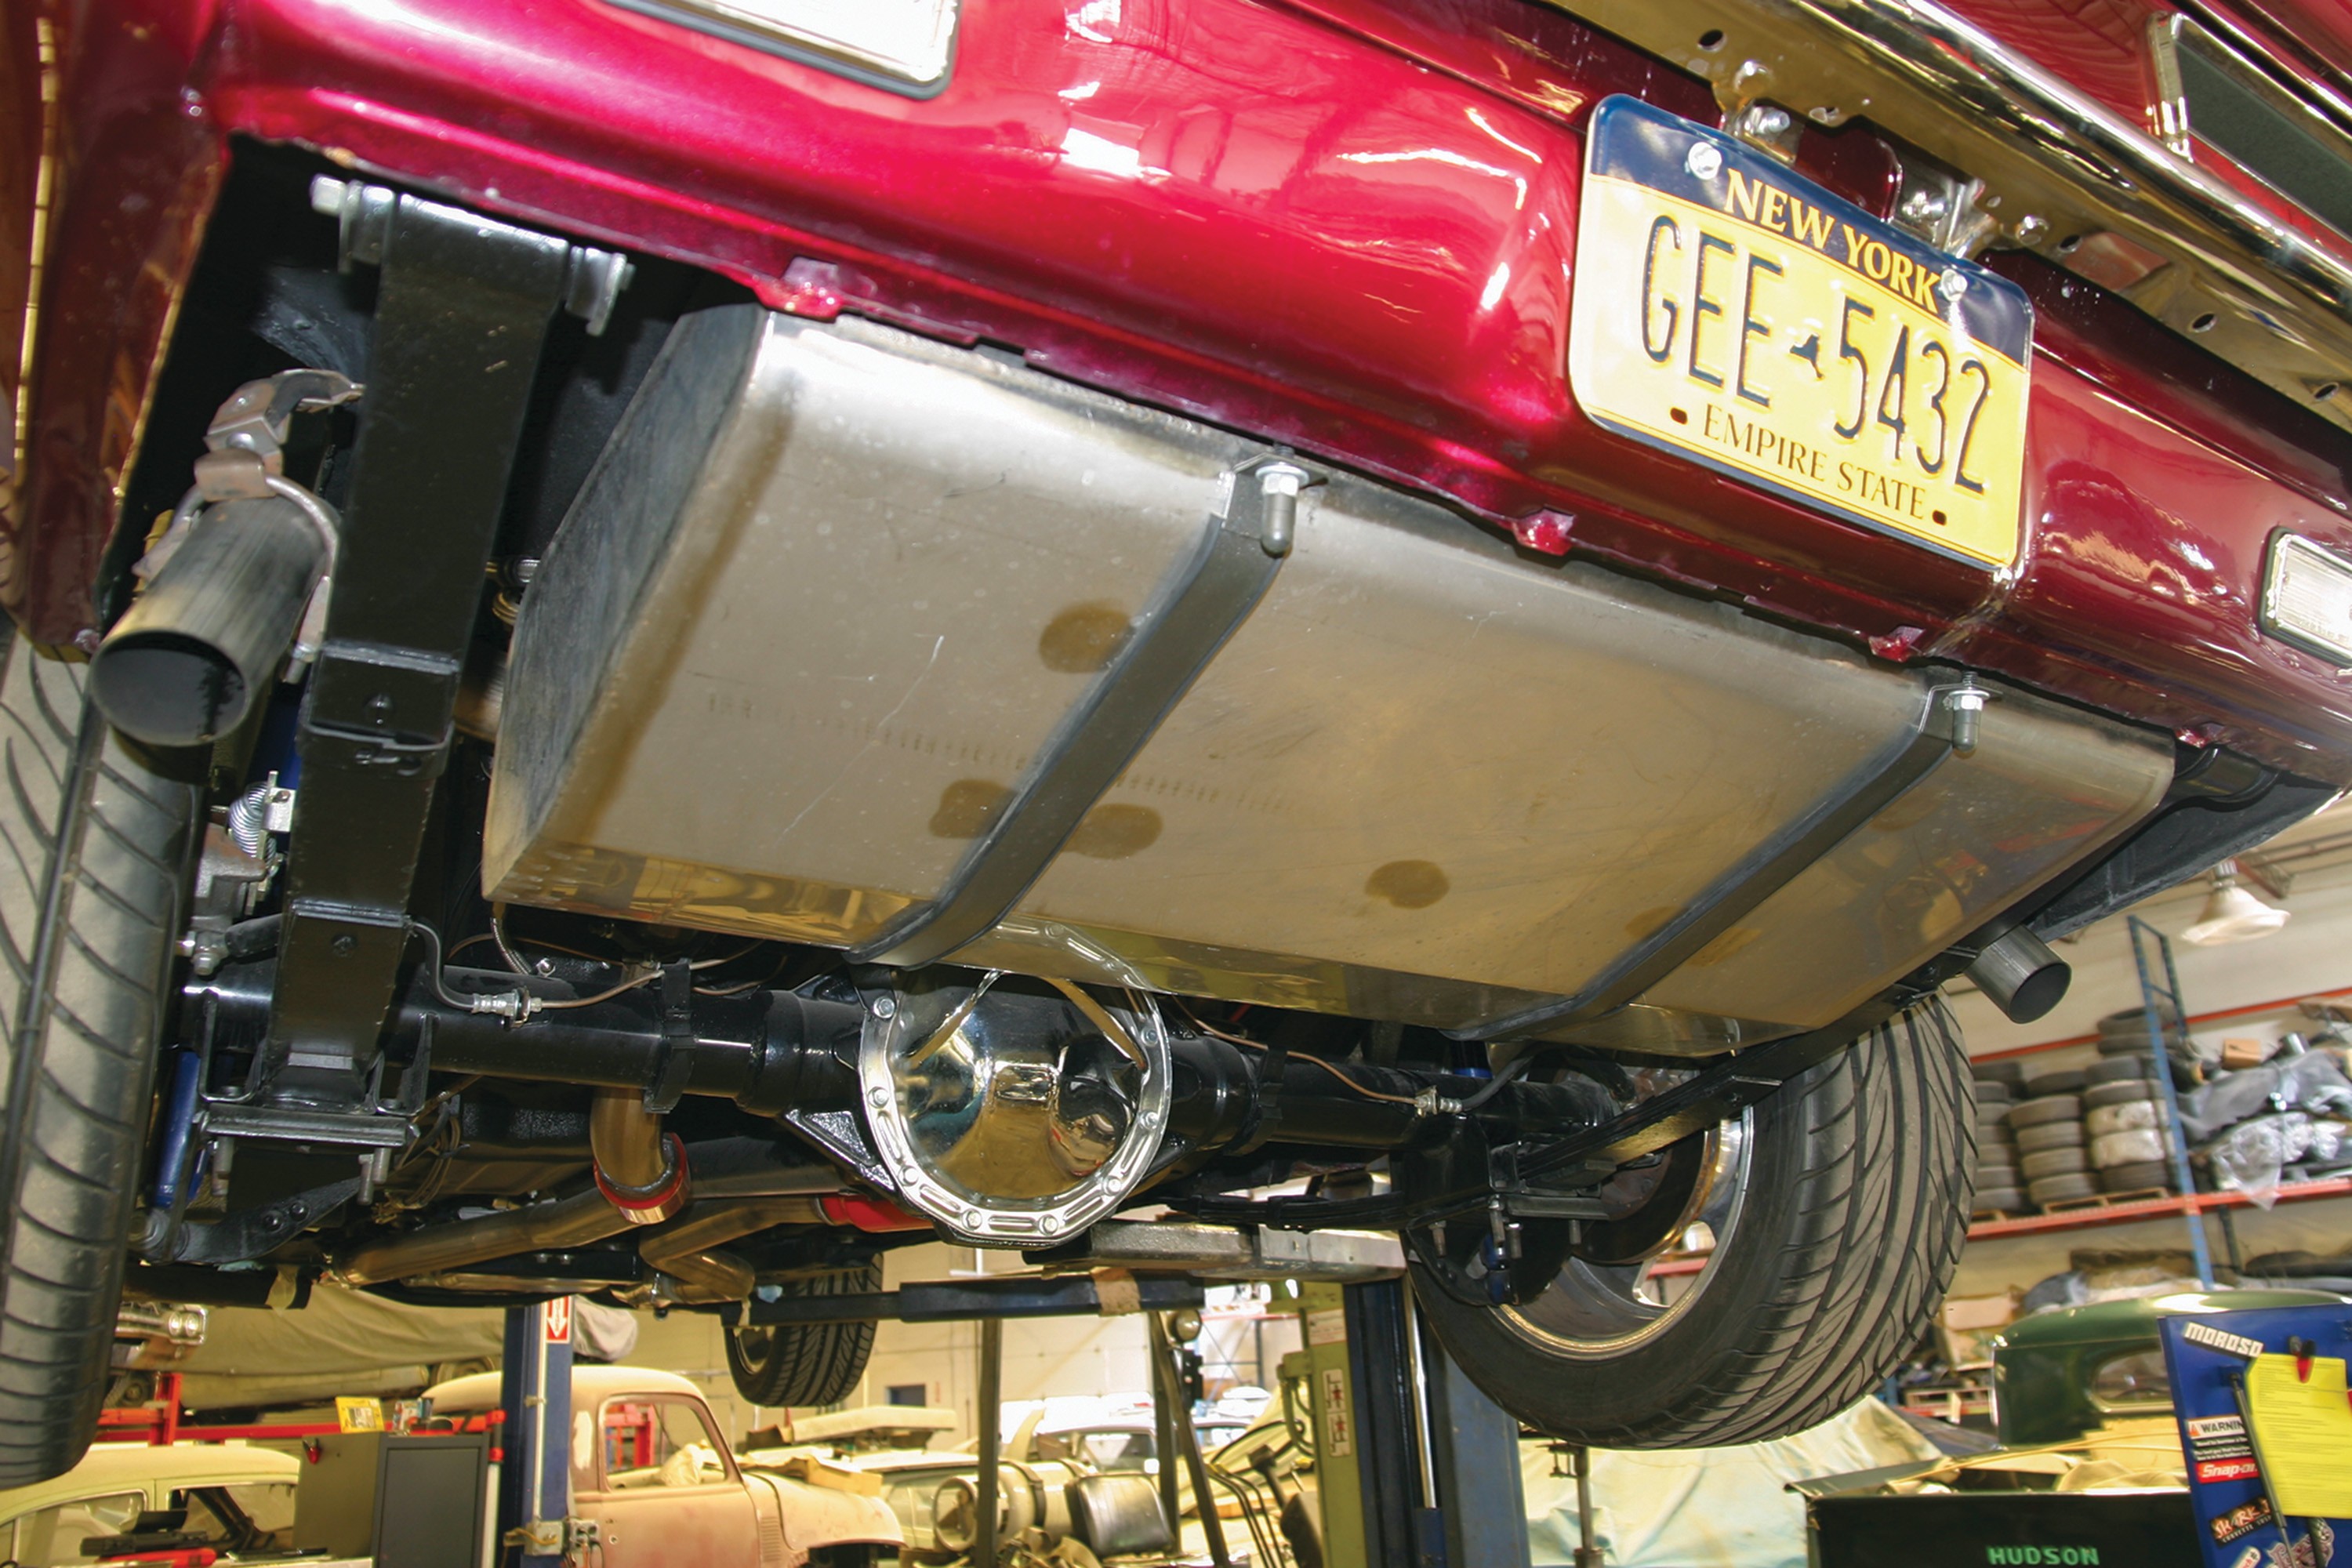 Troubleshooting: Why Does My Chevelle's Rear End Make So Much Noise?